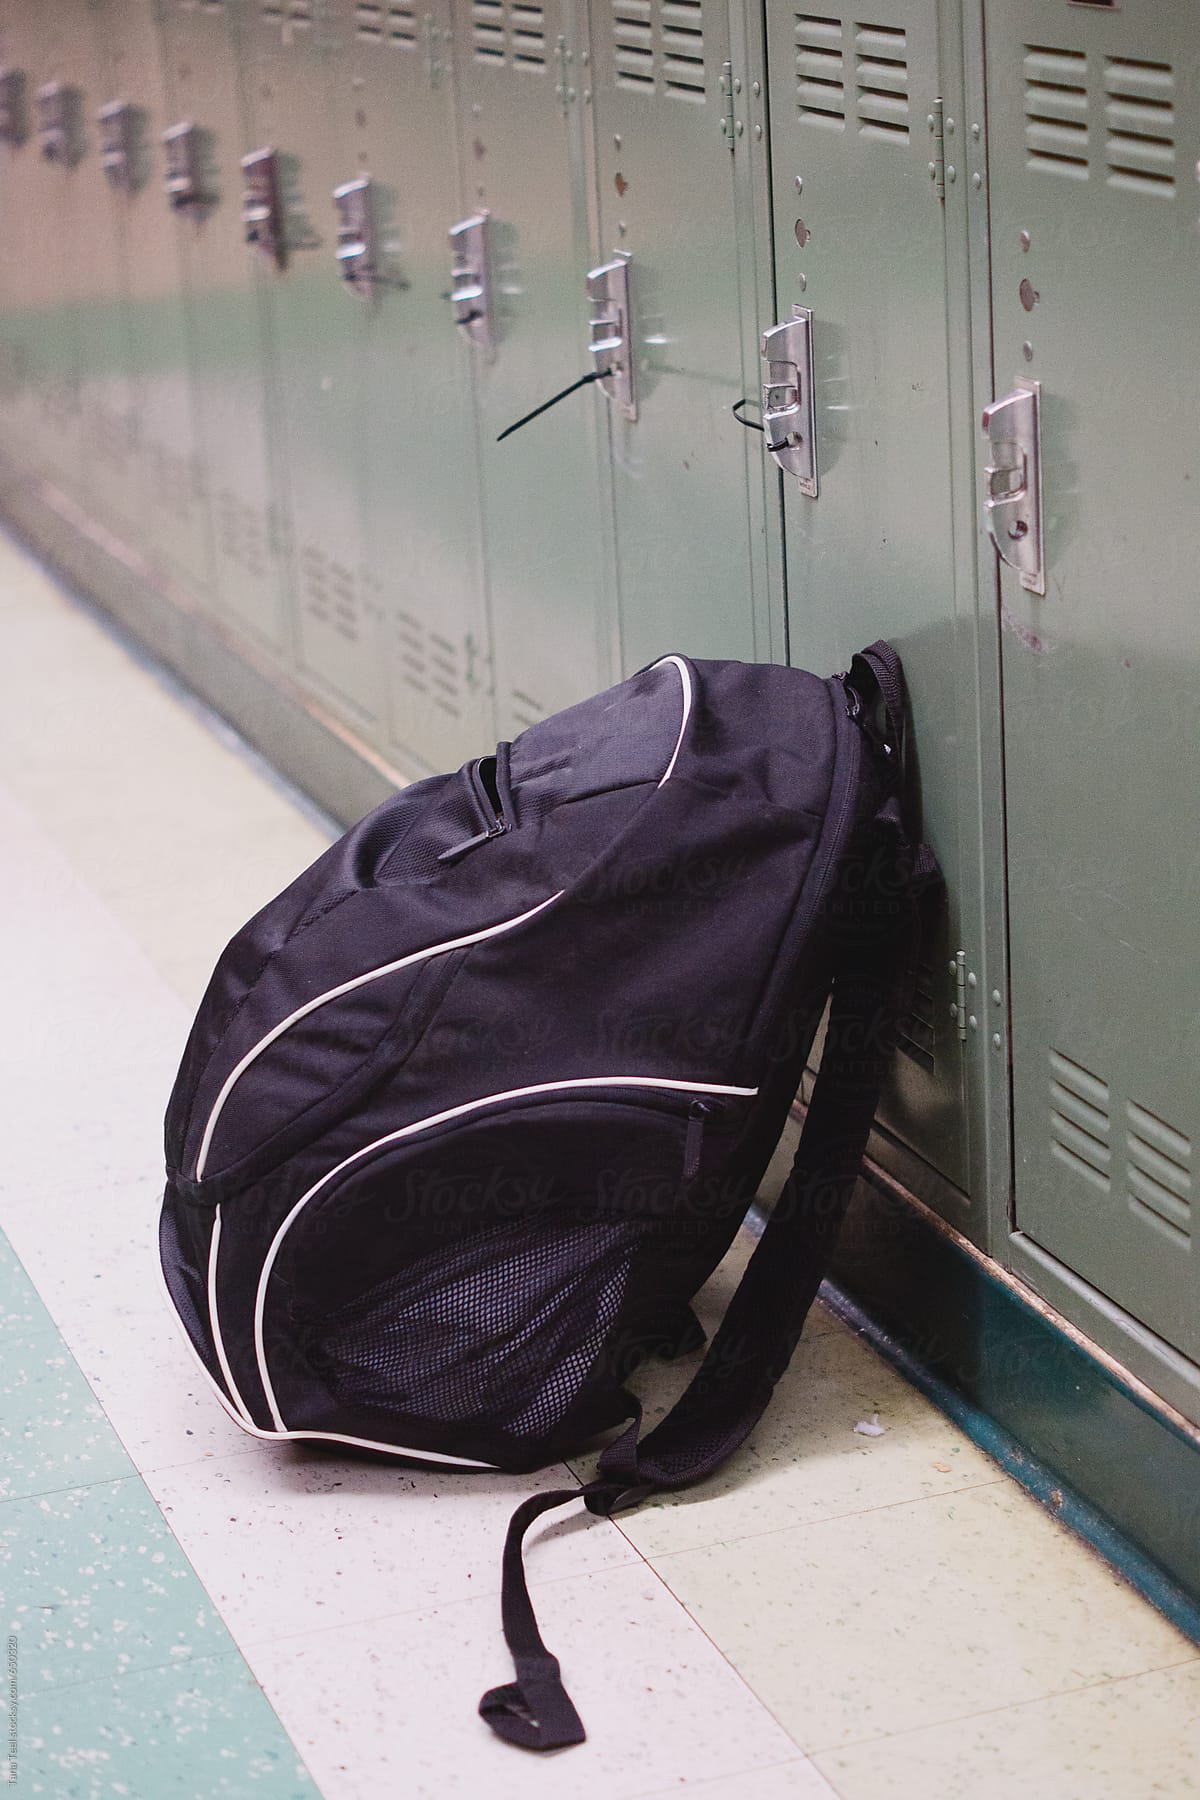 Backpack leans against a bank of lockers in a hallway